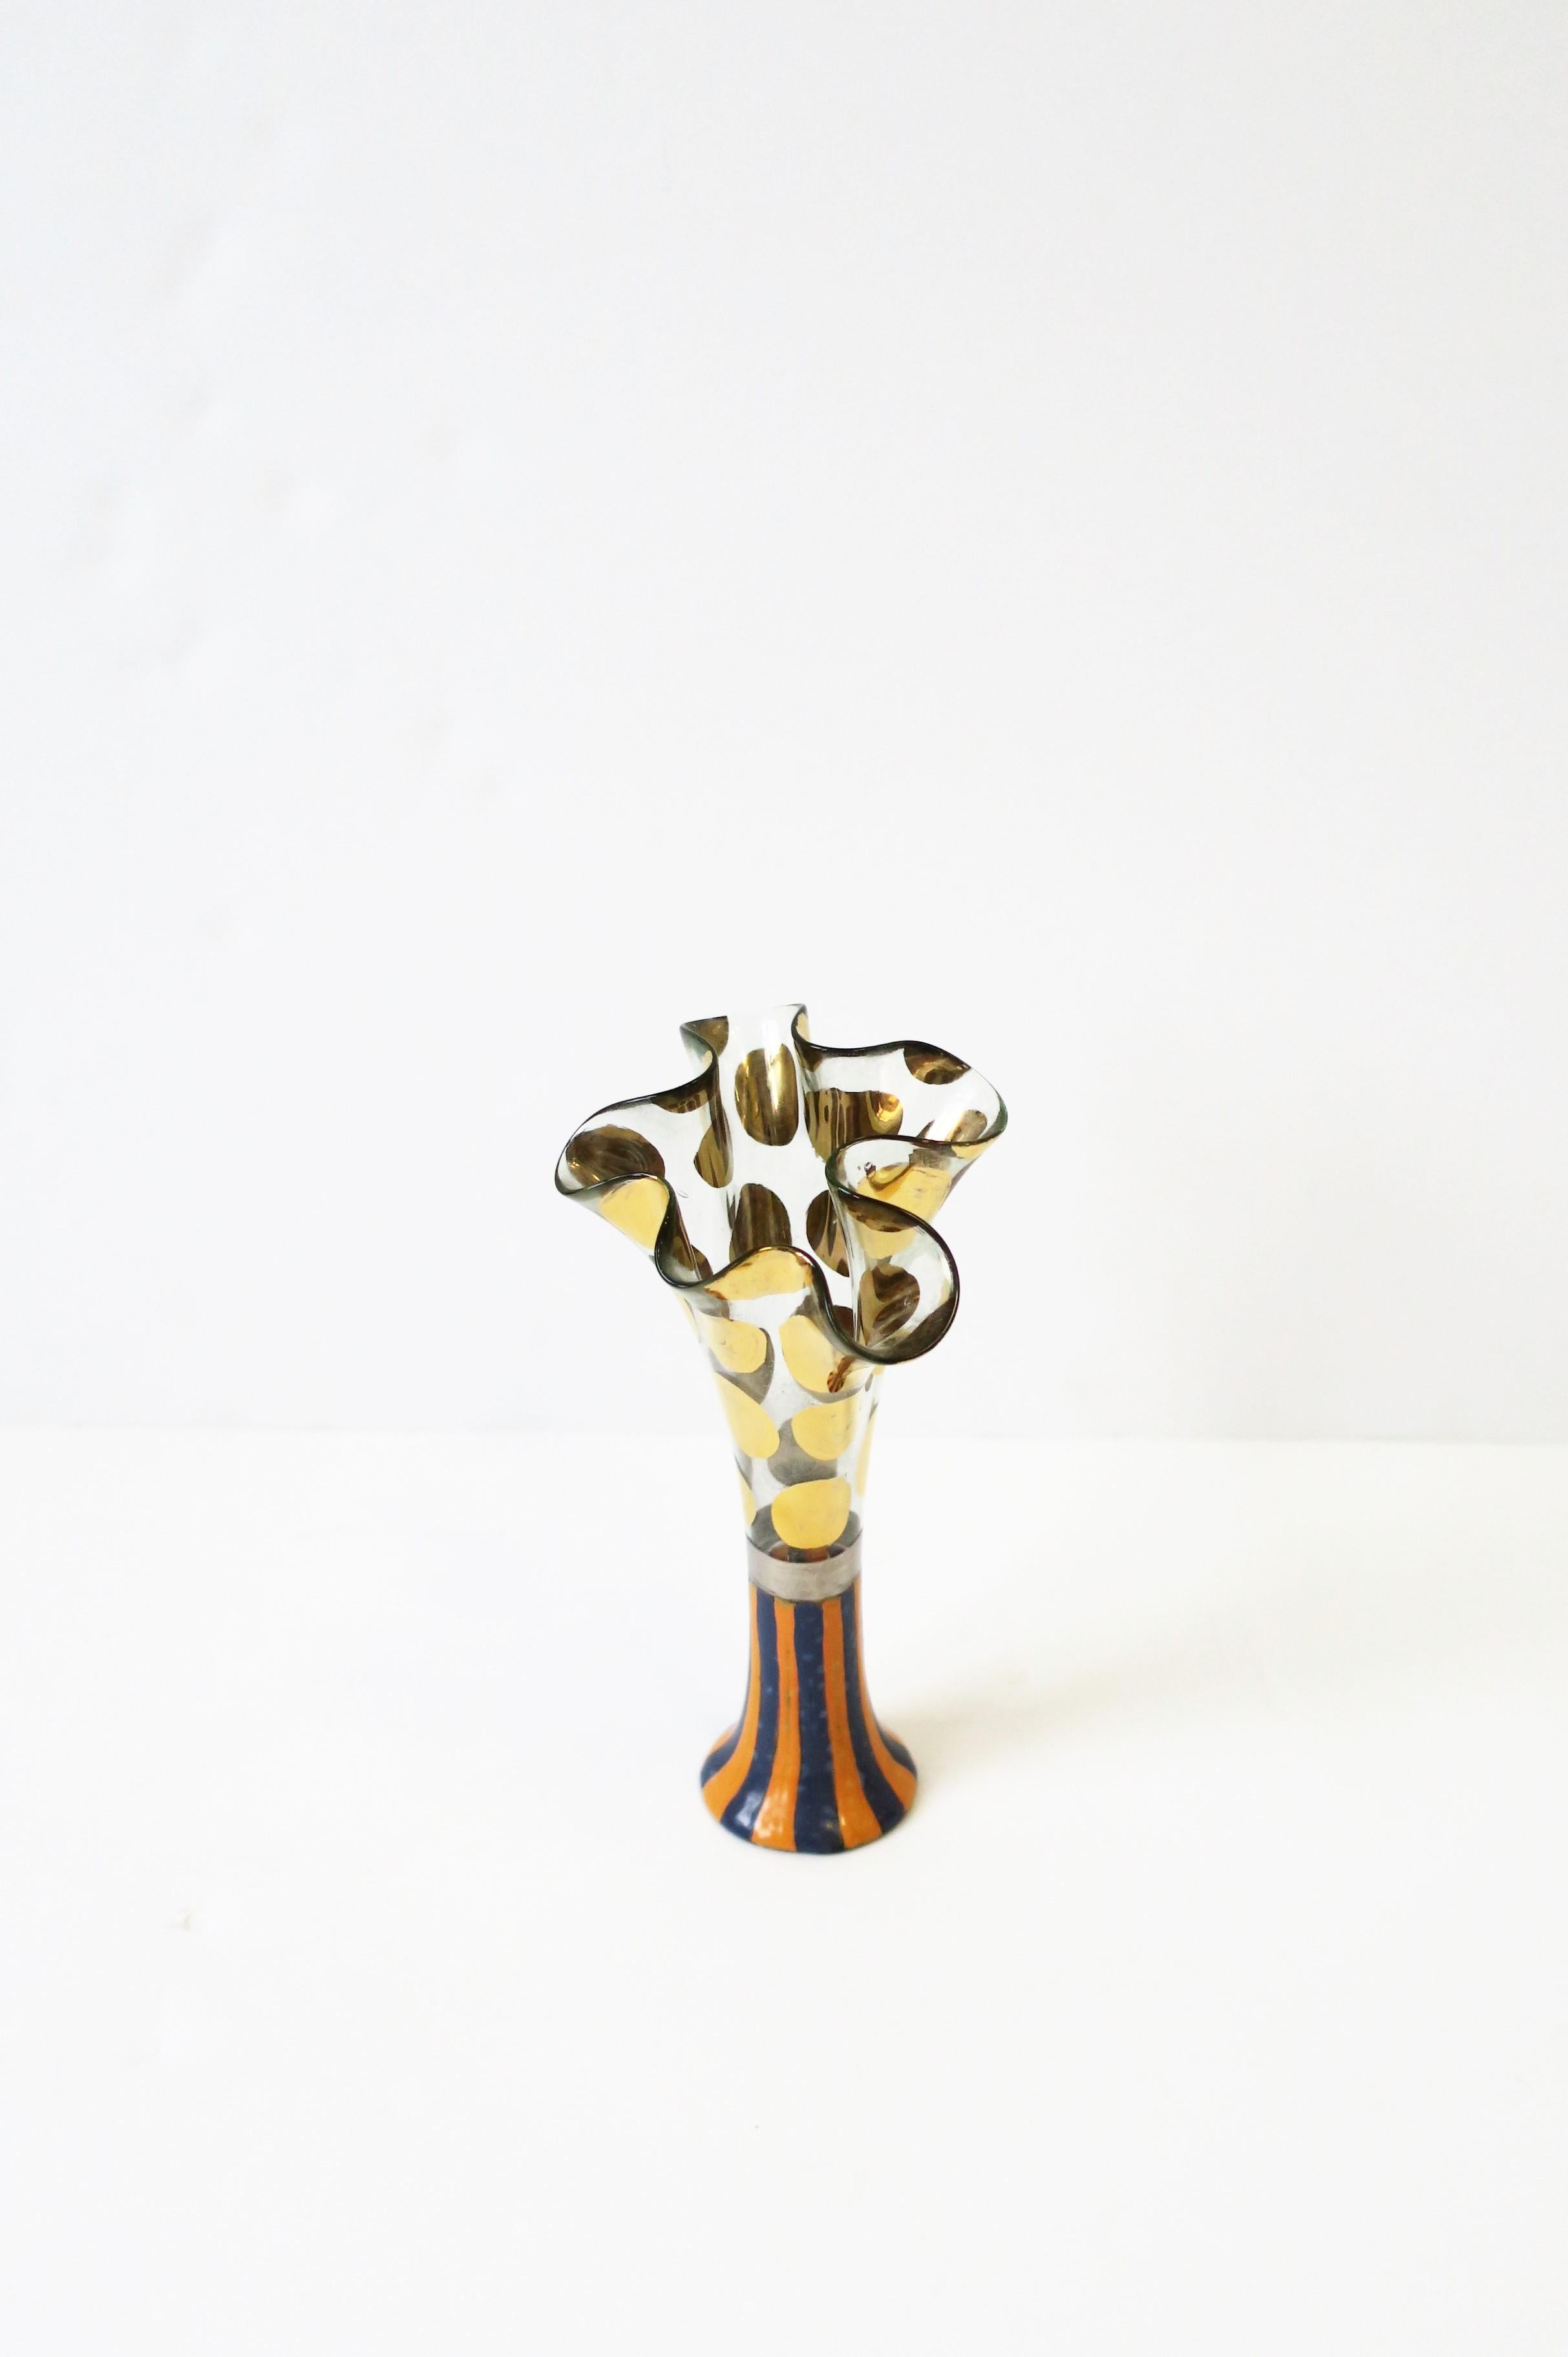 20th Century Mackenzie-Childs Art Glass Vase with Gold Polka Dots, circa 1980s For Sale